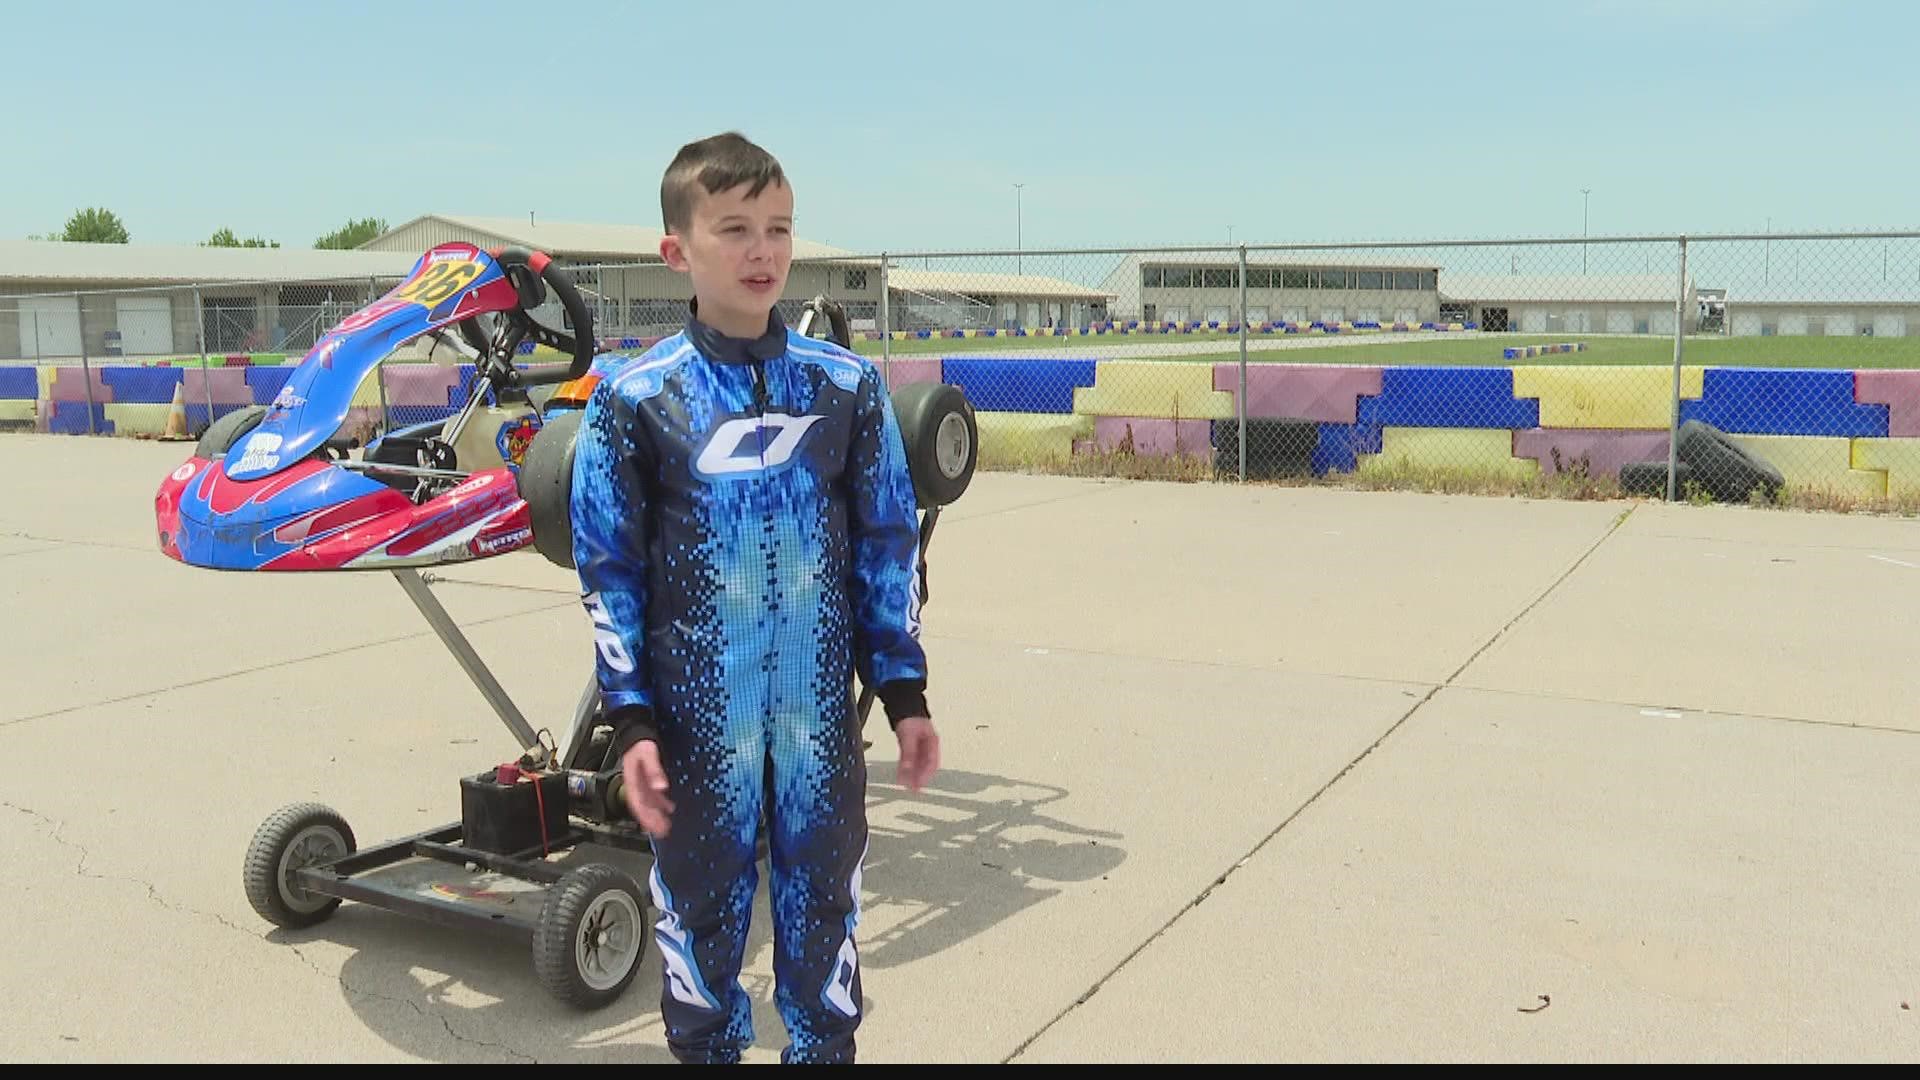 Ty Arbogast has been racing his go-kart since he was 5 years old. Now, he advocates for Crohn's disease when circles the track.